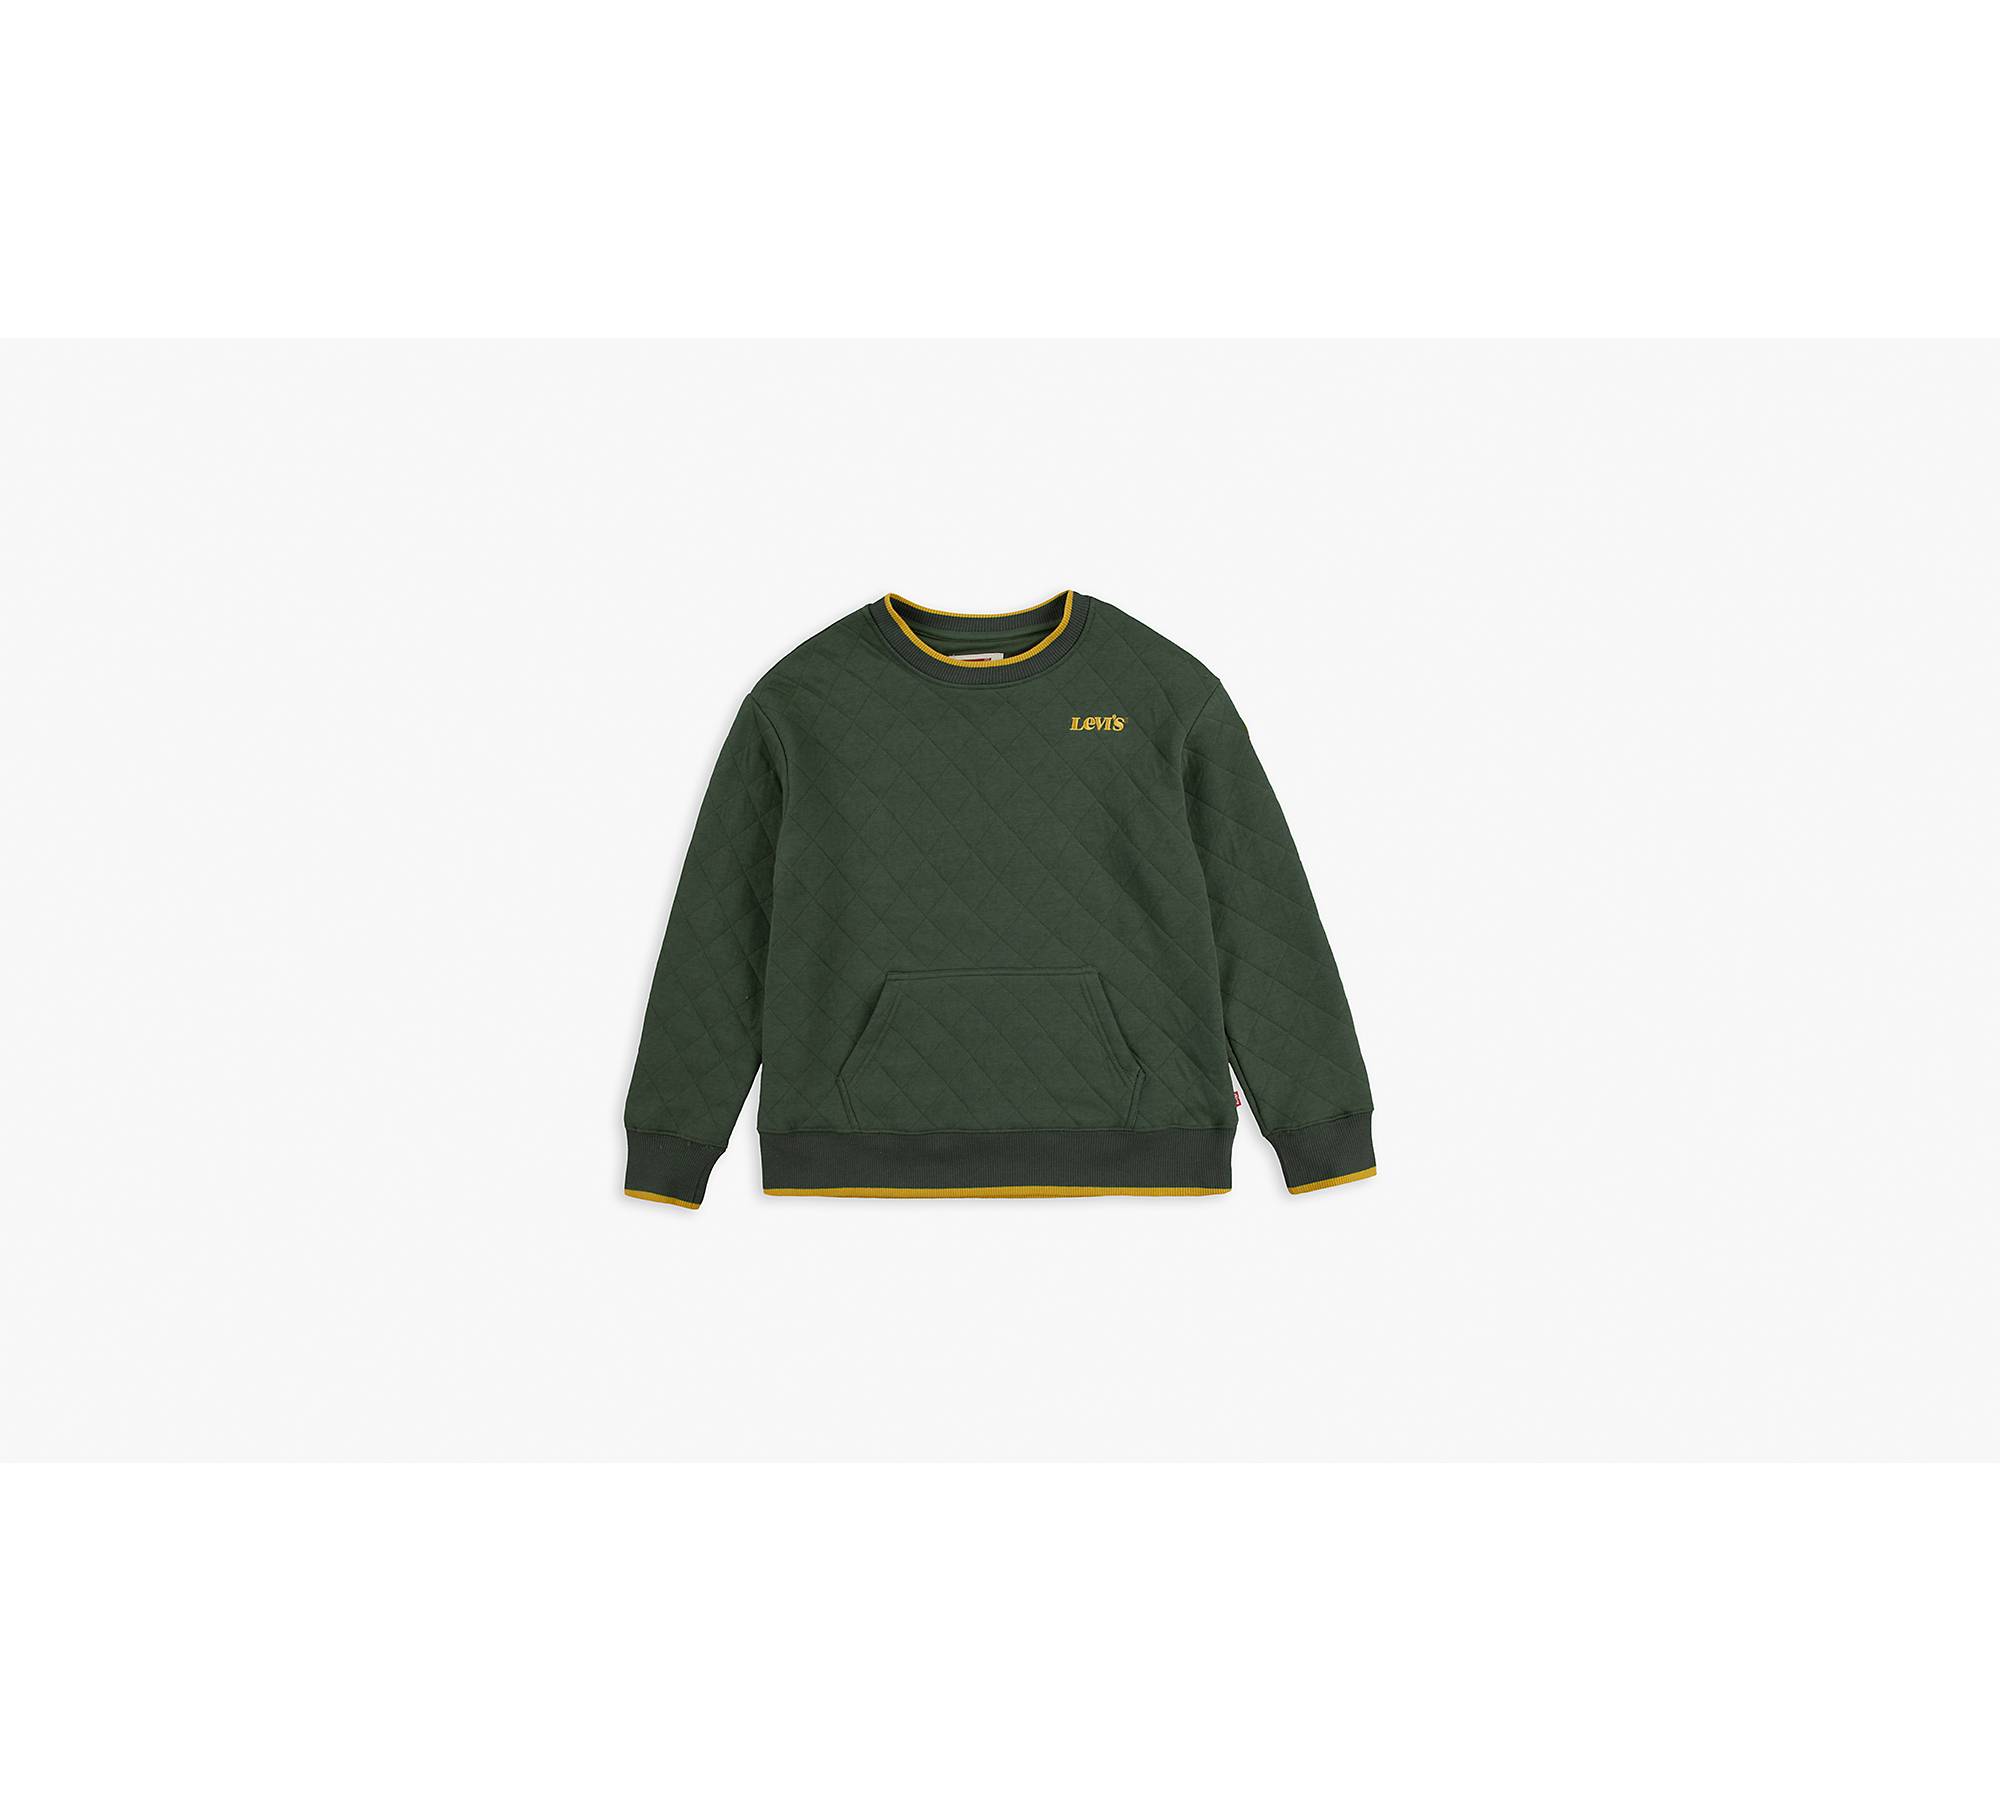 Big Boys S-xl Quilted Jersey Sweatshirt - Green | Levi's® US